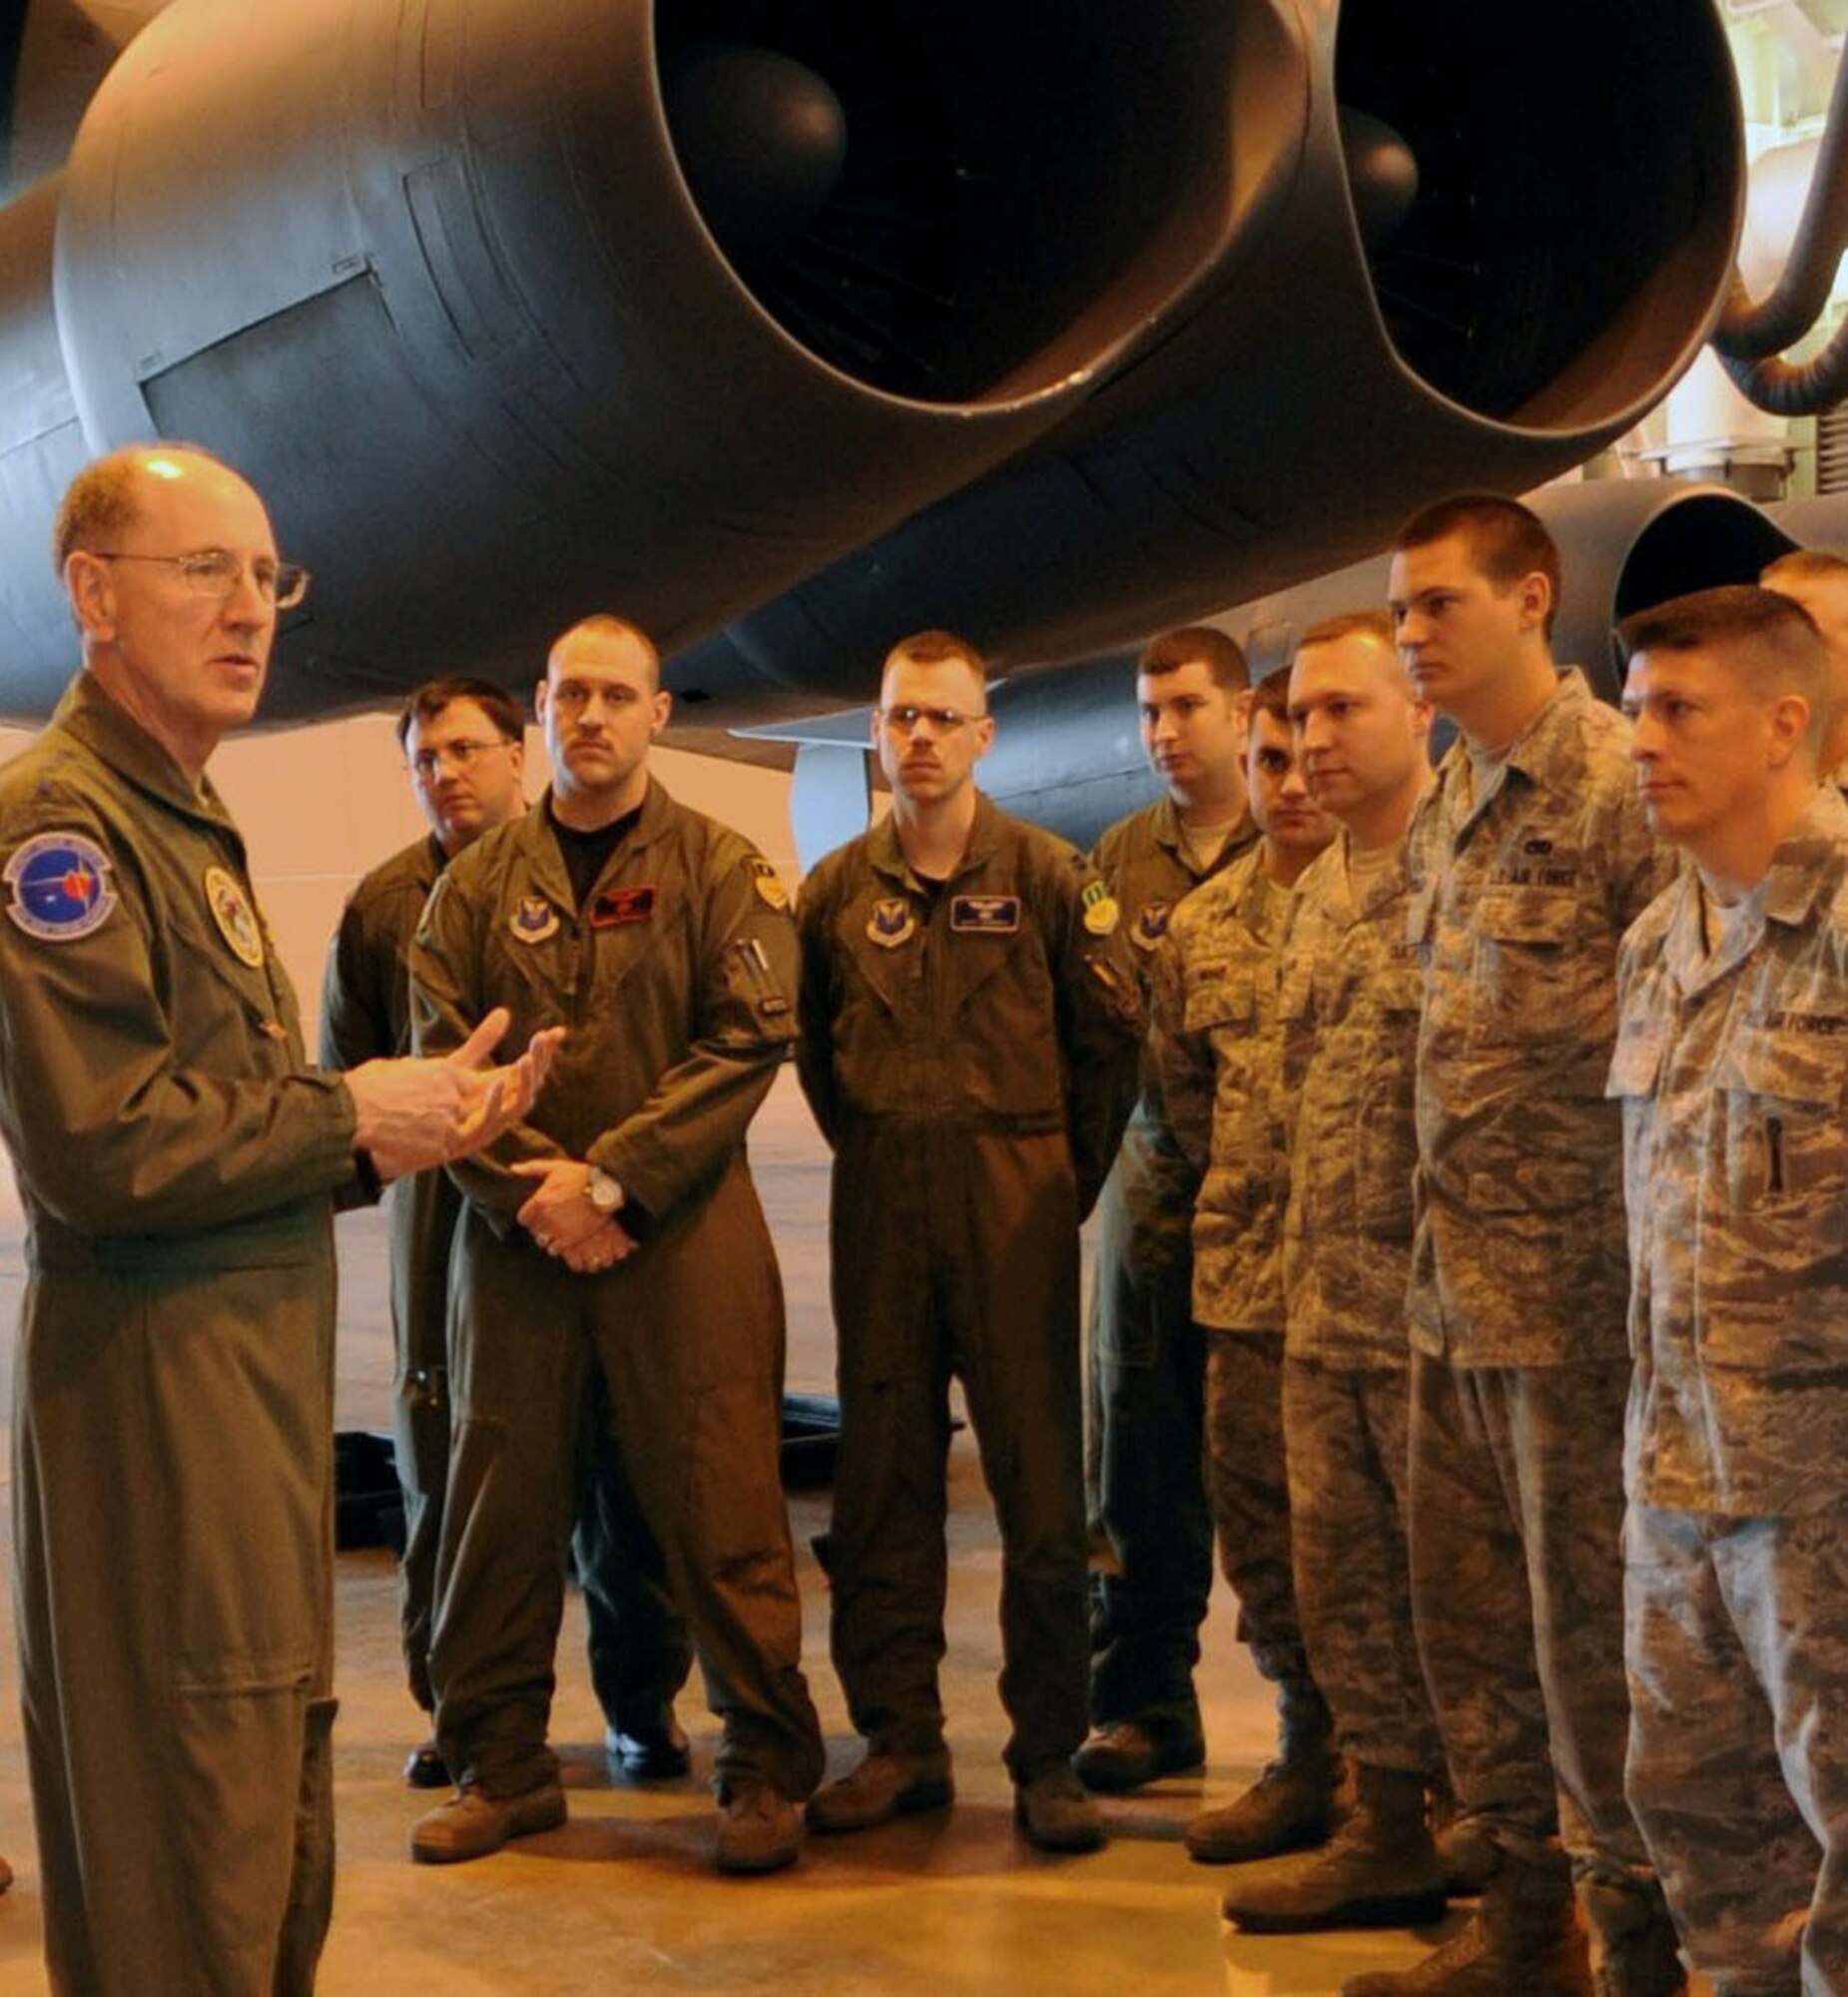 Gen. C. Robert Kehler, U.S. Strategic Command commander, speaks to Airmen
from the 2nd Maintenance Squadron at Barksdale Air Force Base, La., March
17. General Kehler, who took command at U.S. Strategic Command in January,
met with Air Force Global Strike Command Airmen and leaders during his visit
to discuss the AFGSC mission and the importance of a safe, secure and
effective nuclear deterrent. (U.S. Air Force photo/ Senior Airman Alexandra M. Boutte)(RELEASED)
